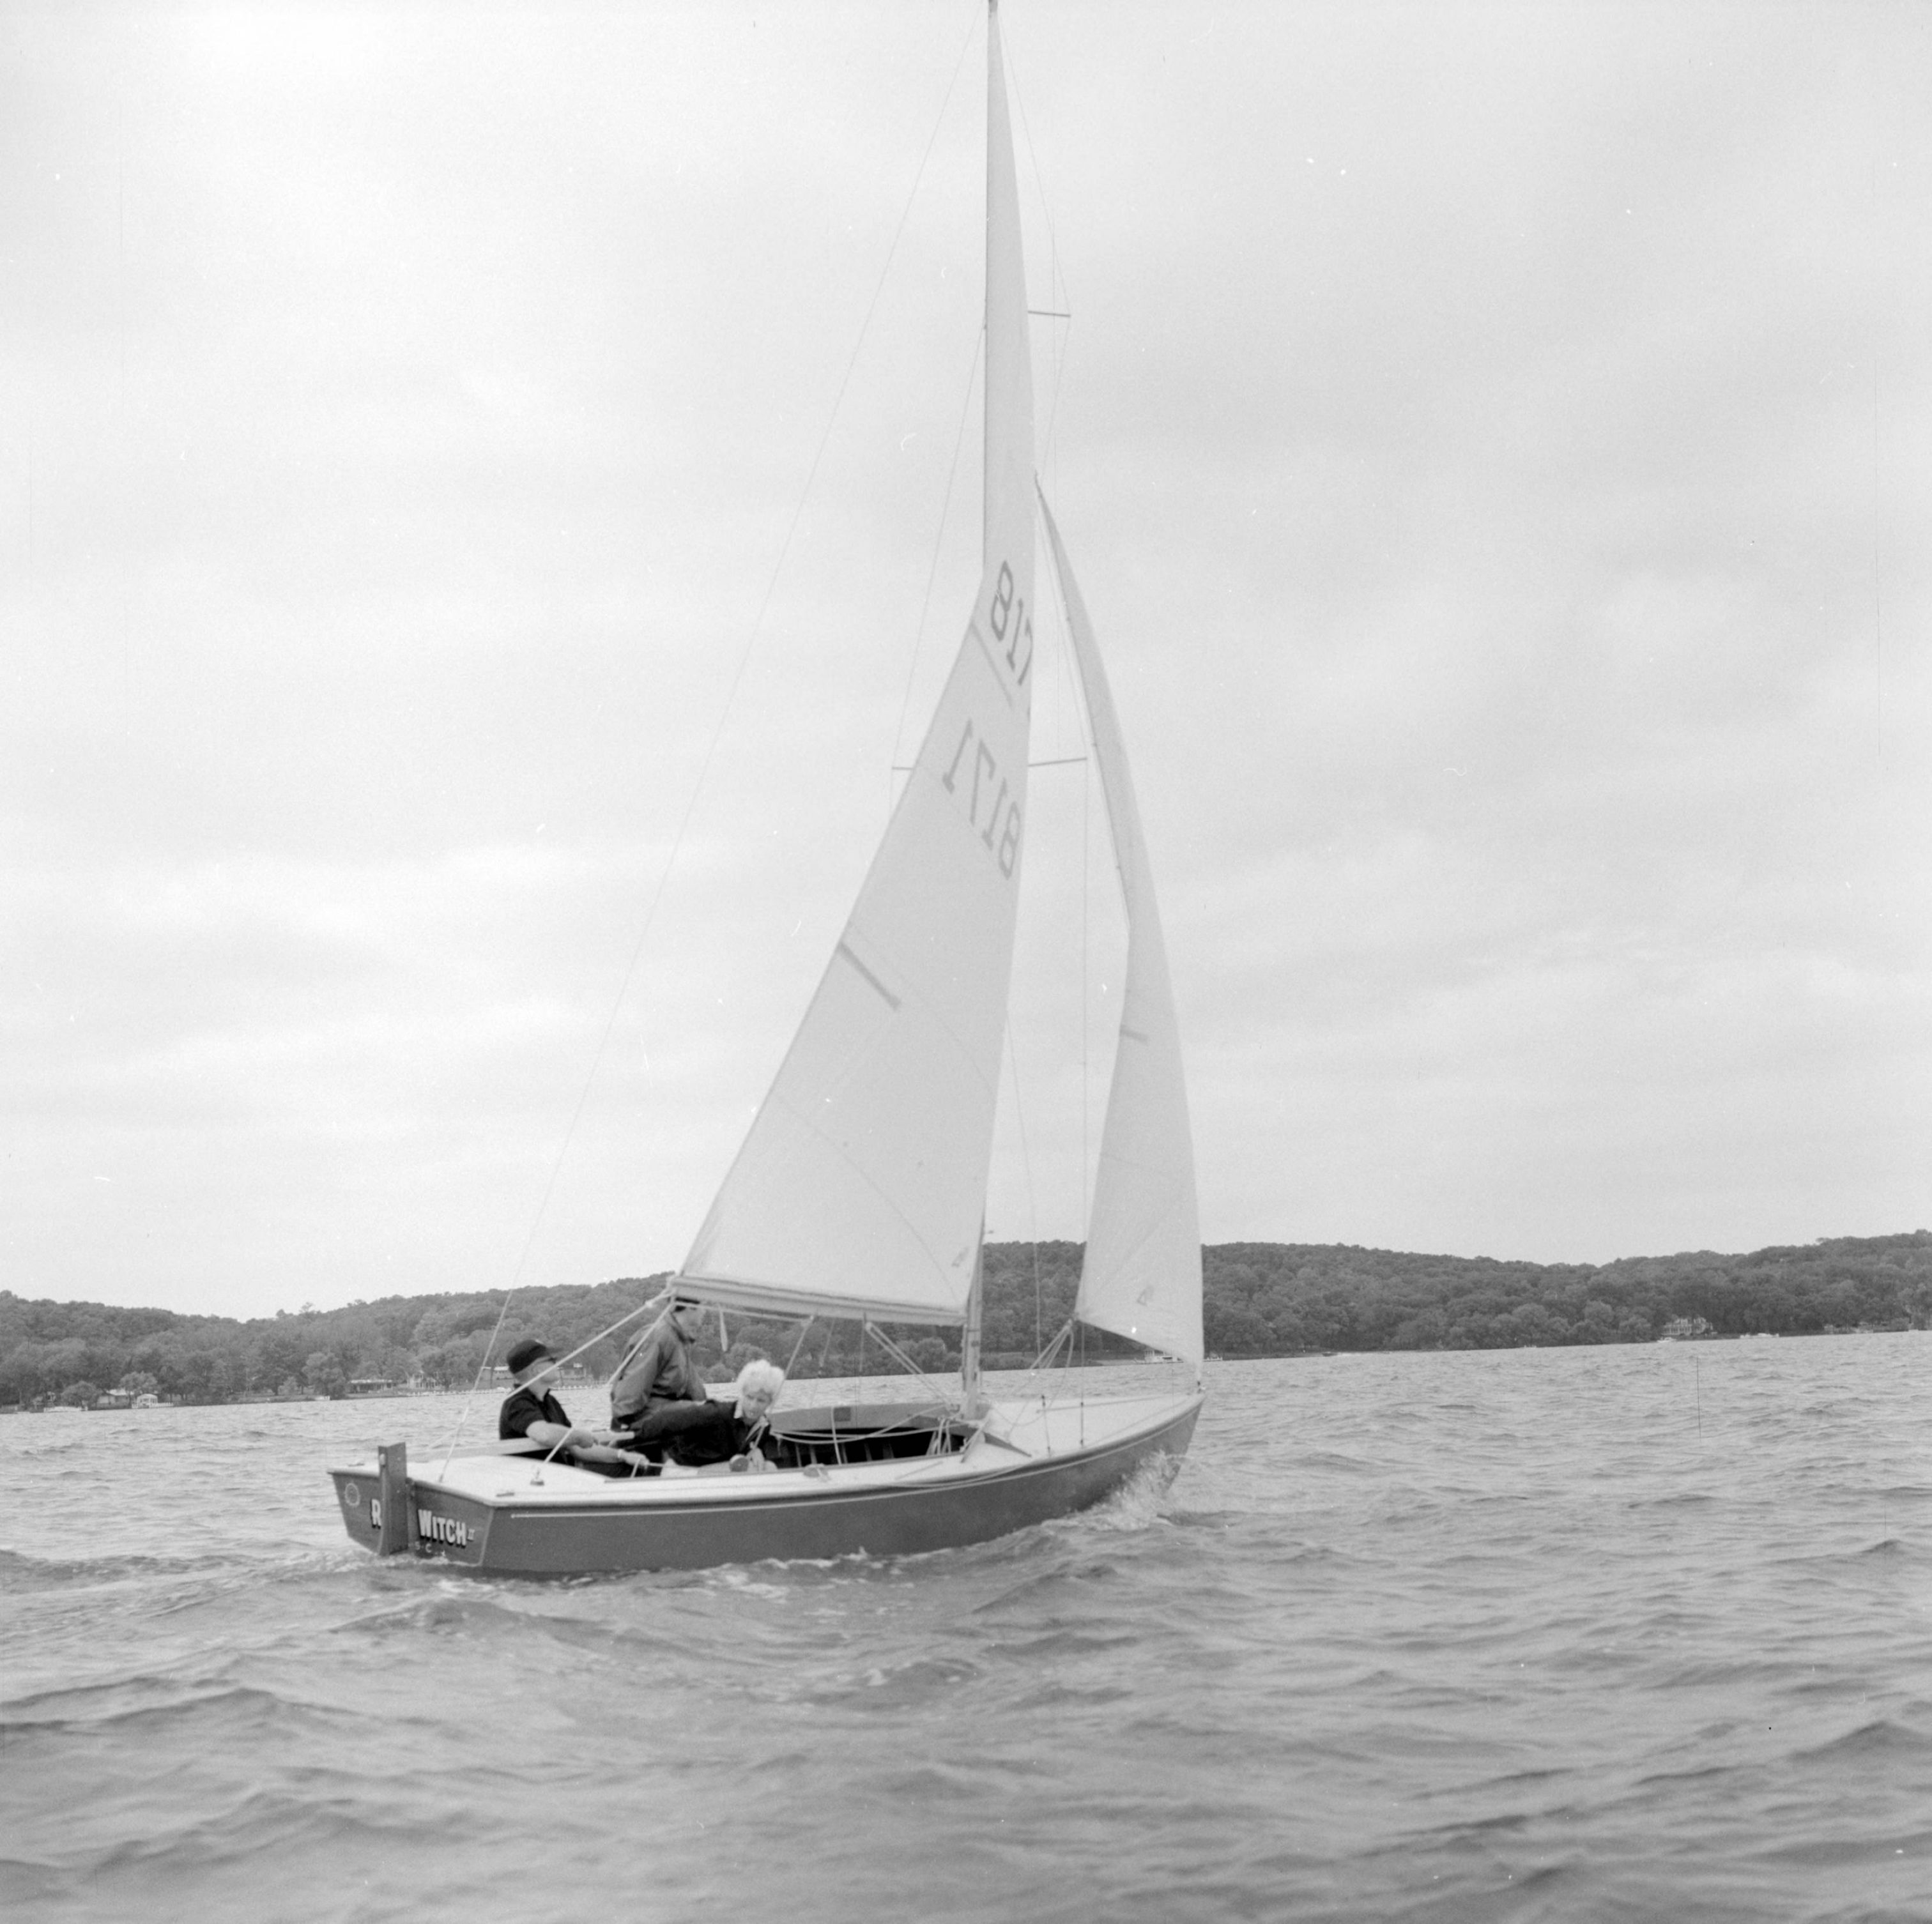 The many lakes in Walworth County spurred tourist development following the Civil War. Sailing on Lake Geneva, as pictured here, proved to be popular with vacationers. 